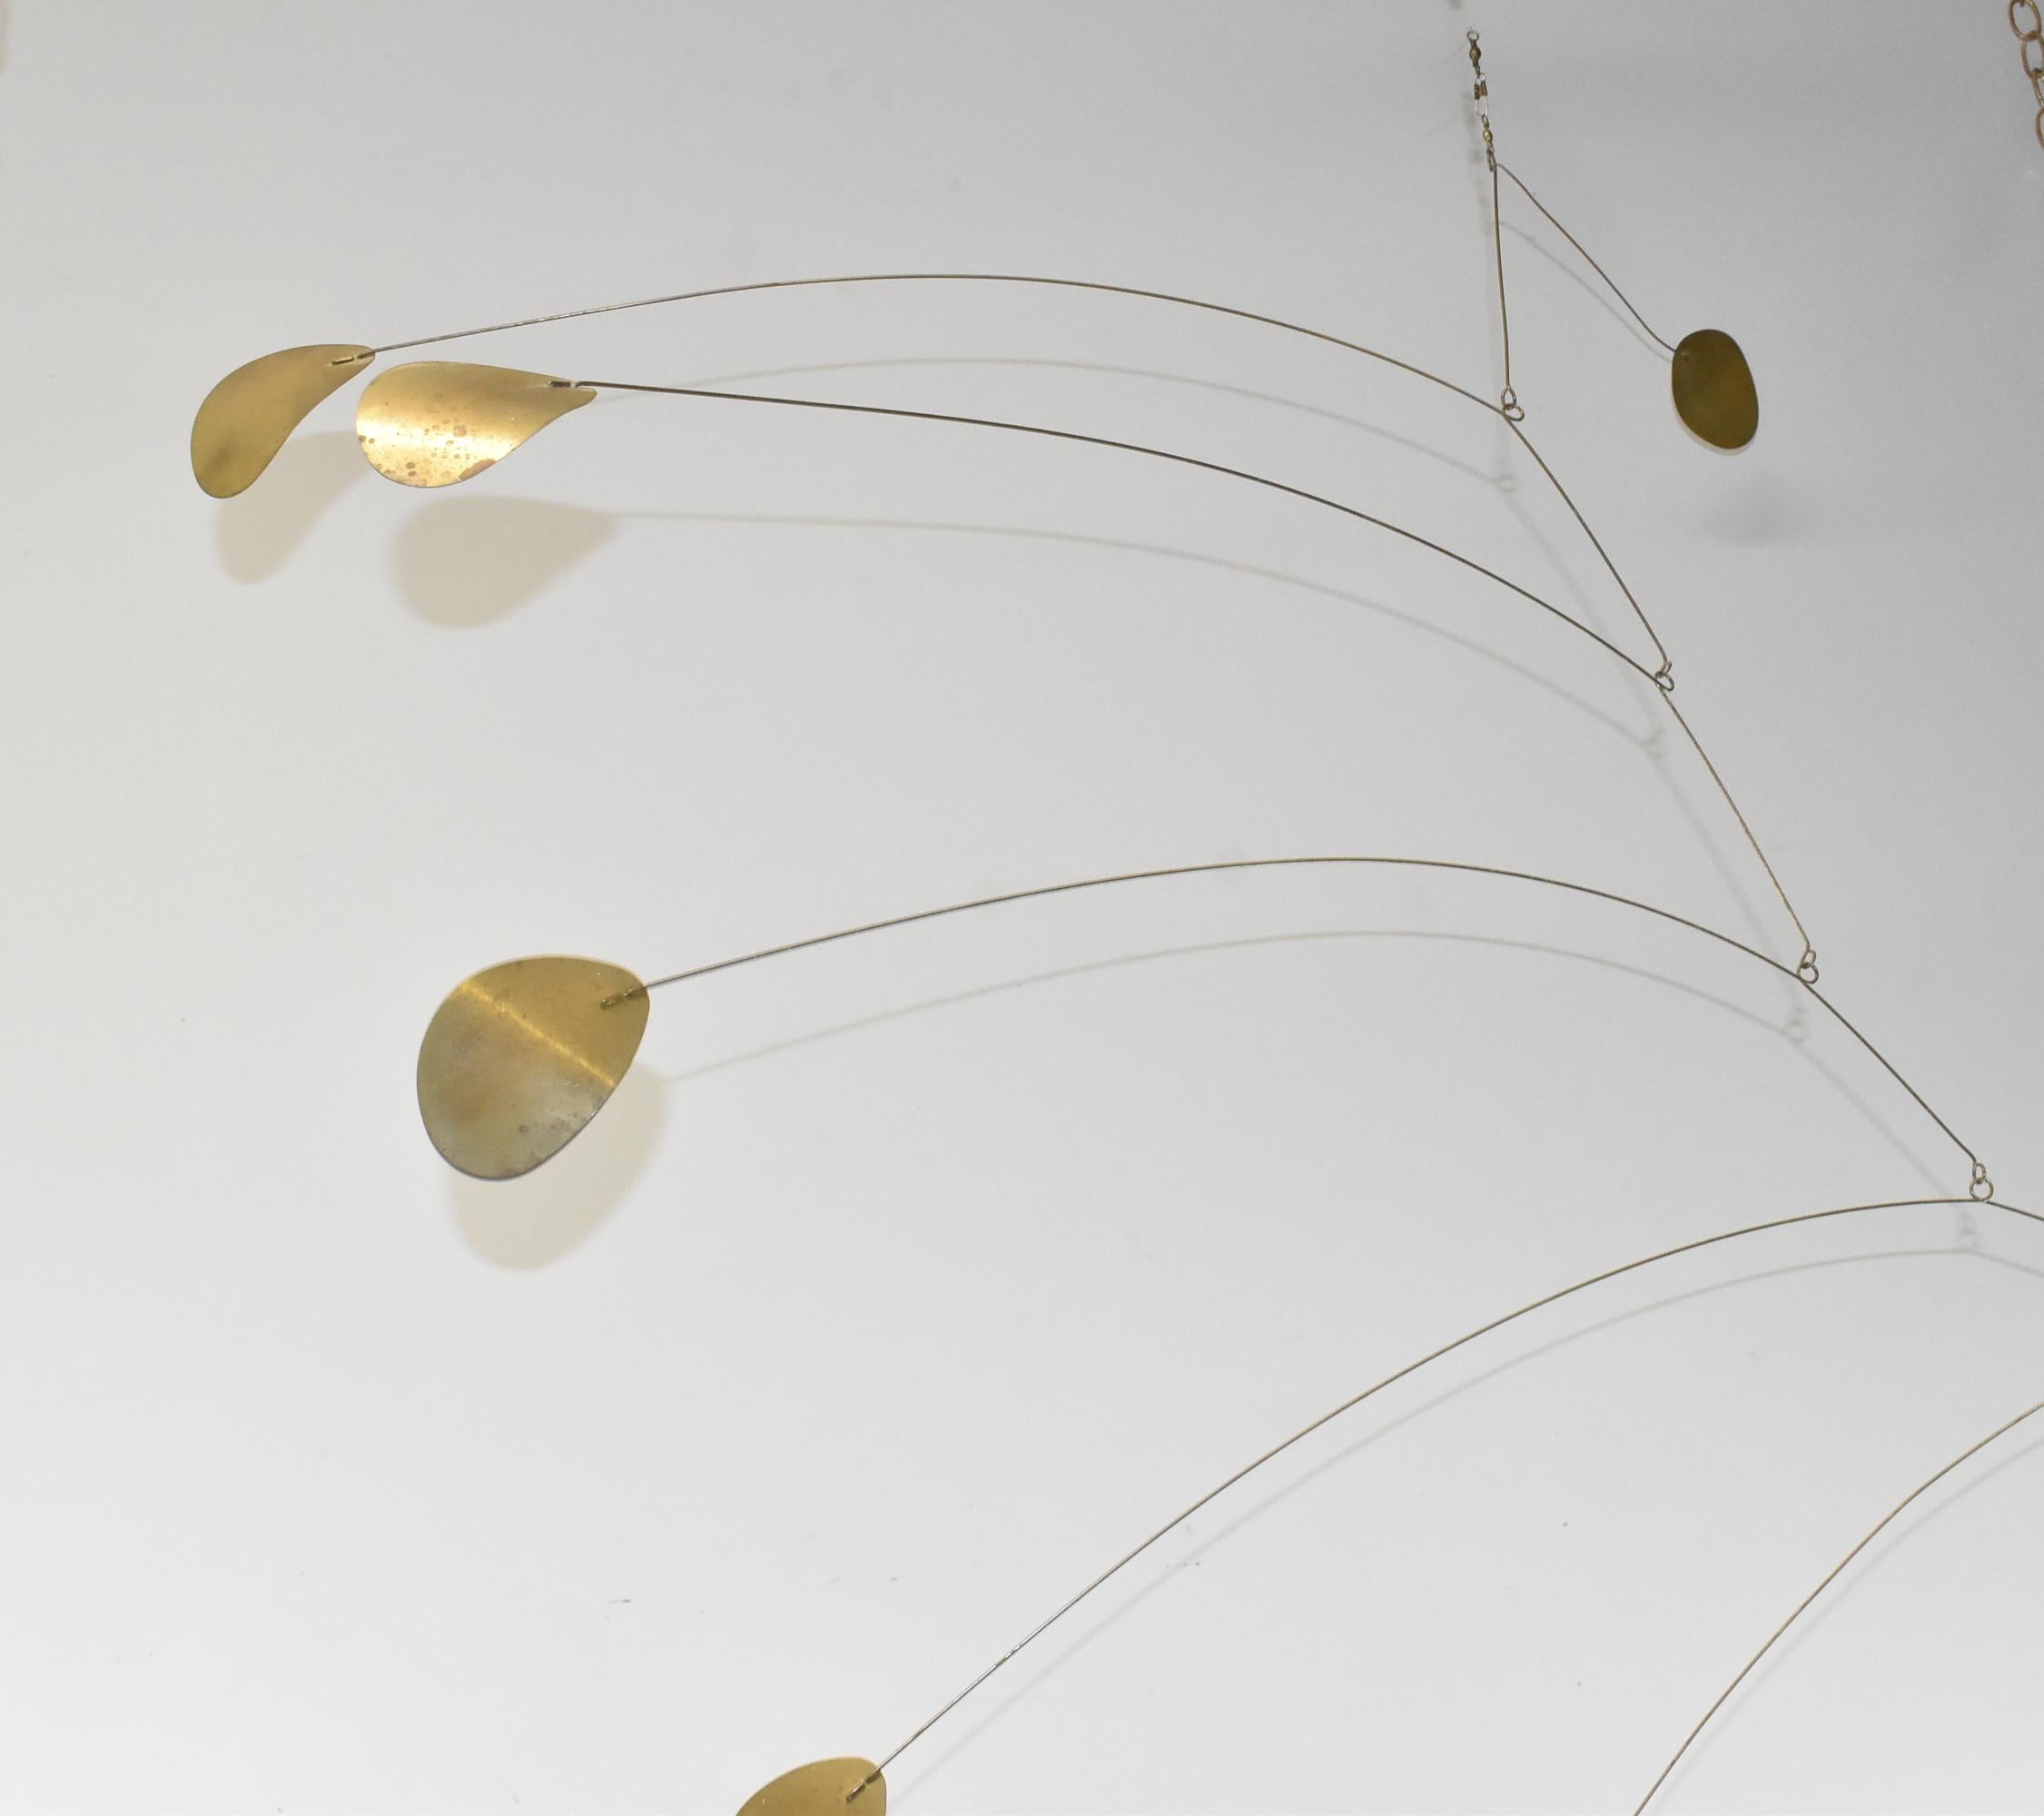 1970's Brass Mobile In the Style of Alexander Calder. Signed initial JL. Great condition. Hanging mobile measures 55